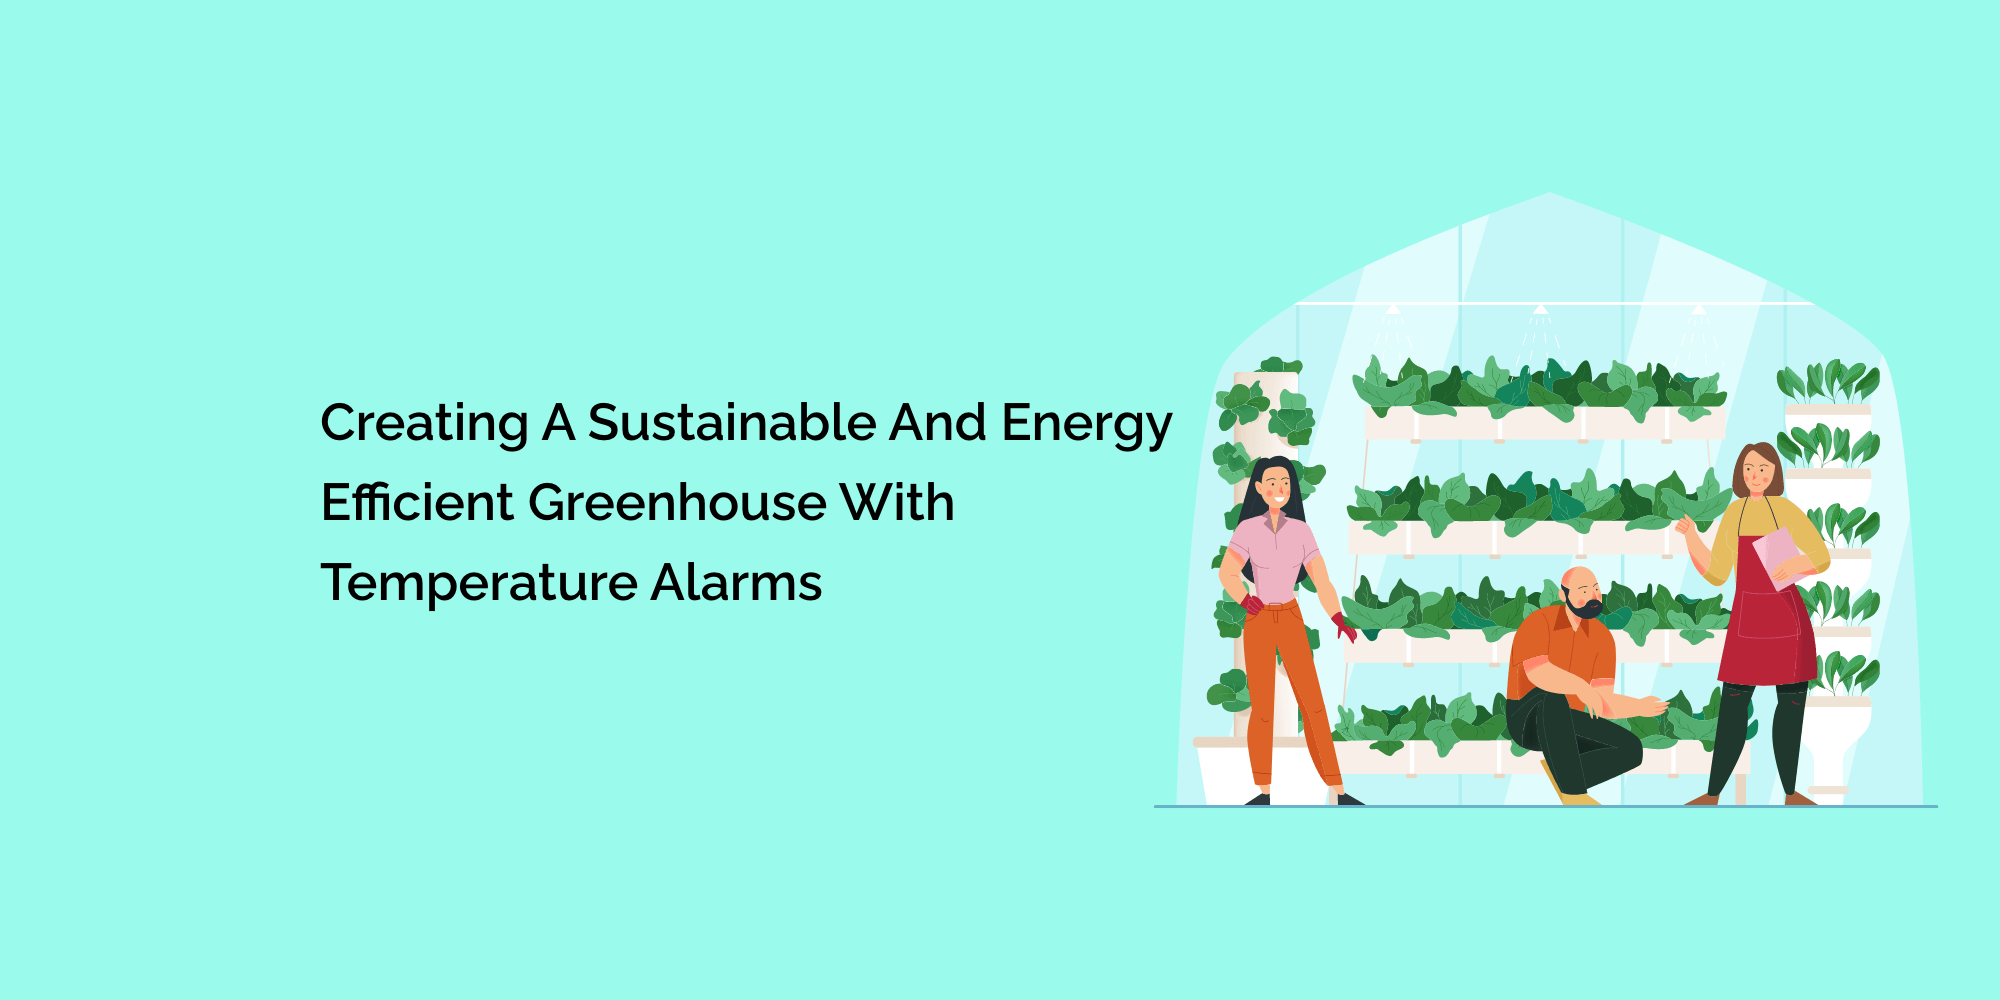 Creating a Sustainable and Energy-Efficient Greenhouse with Temperature Alarms